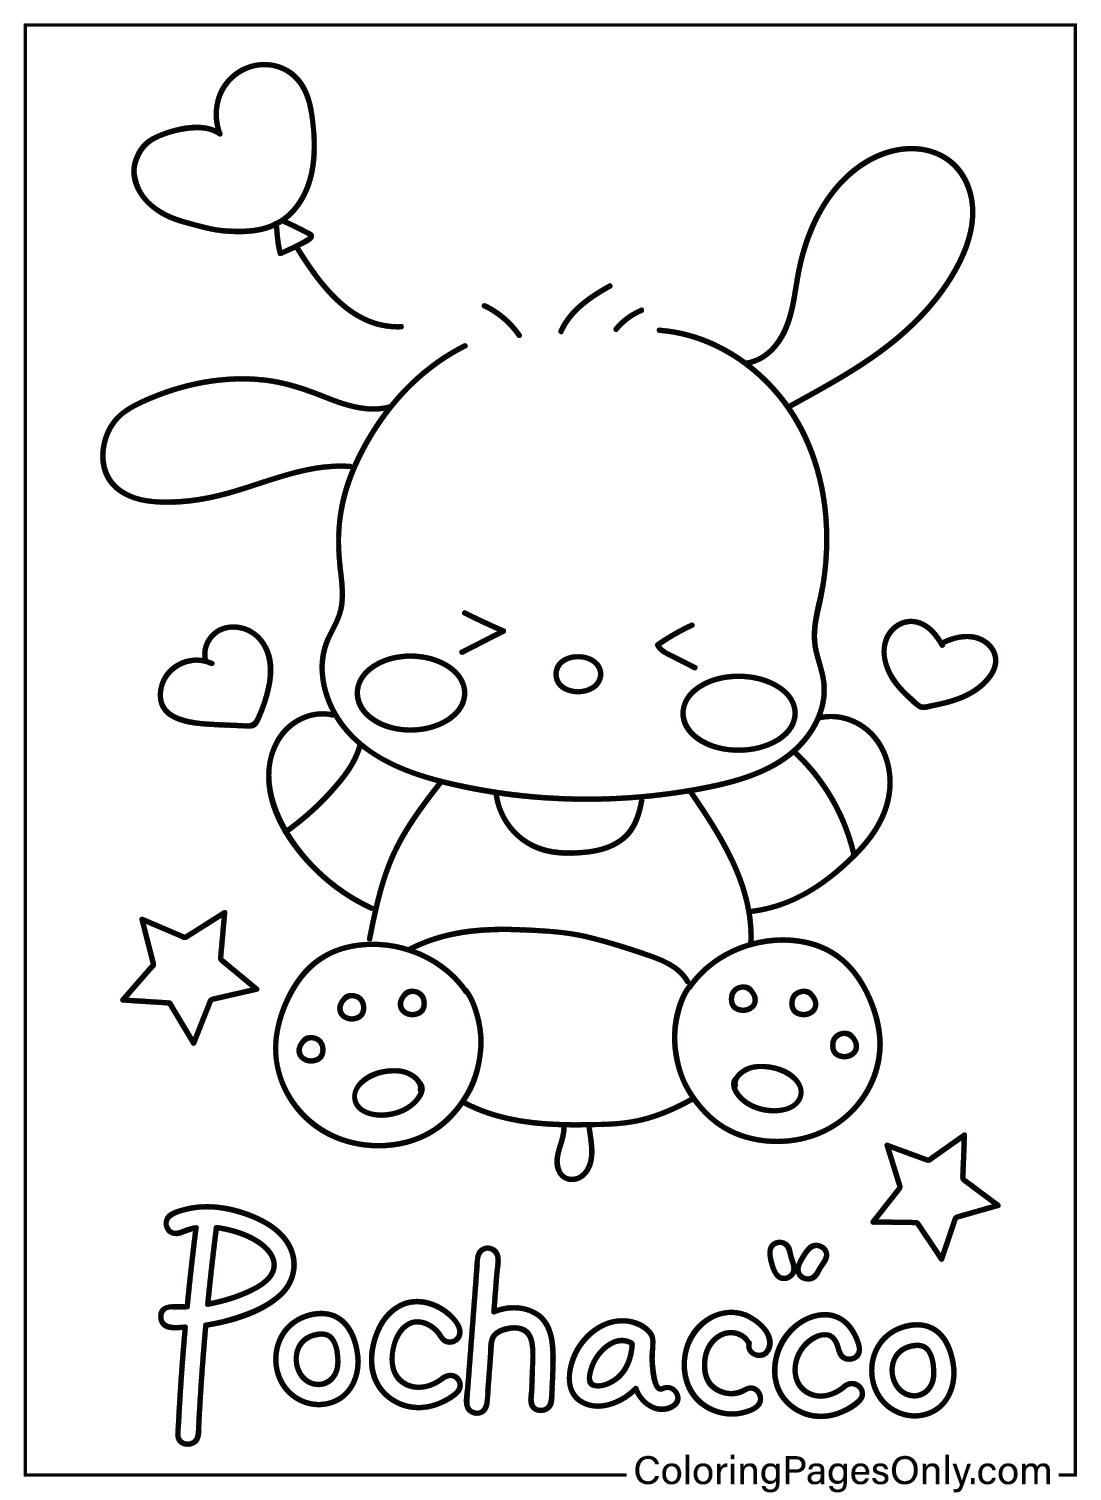 Pochacco Coloring Pages - Free Printable Coloring Pages